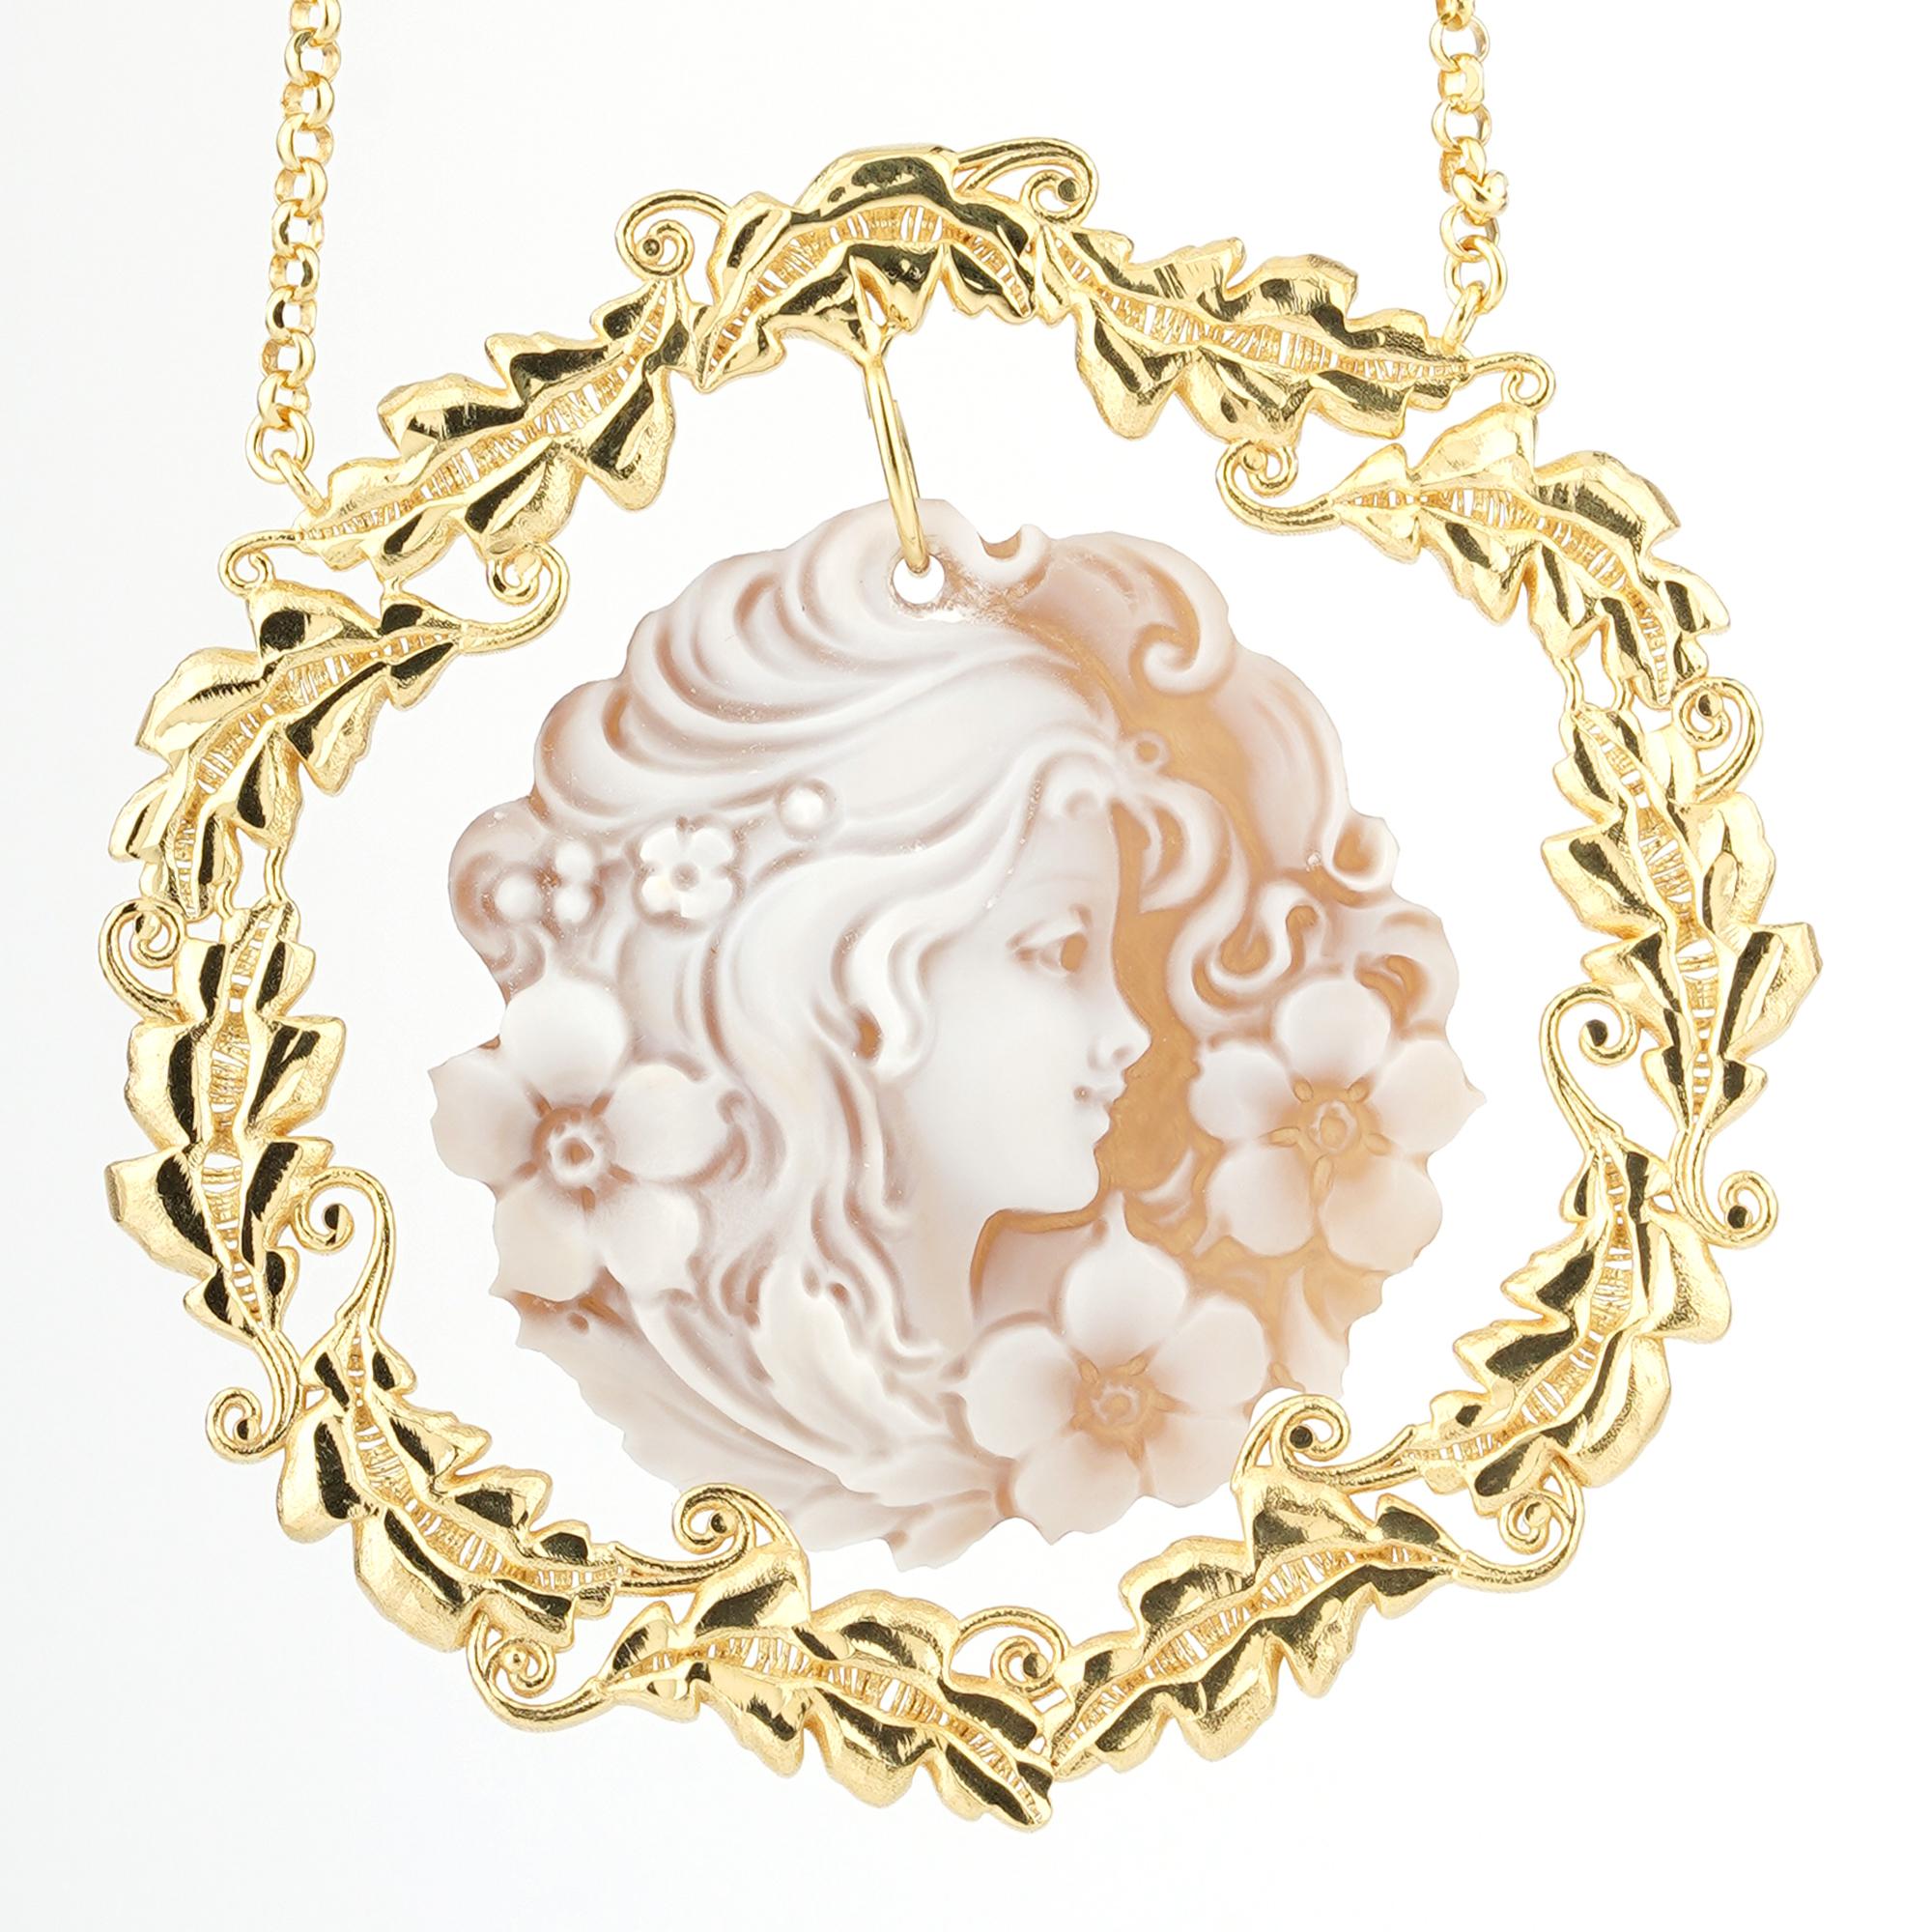 18Kt Rose Gold Plated 925 Sterling Silver Sea Shell 35mm Cameo Necklace 49cm. Fully handcarved Portrait on a sea shell cameo set in a 18kt Gold plated silver pendant necklace. Carvings are performed by our master artisans with generations of